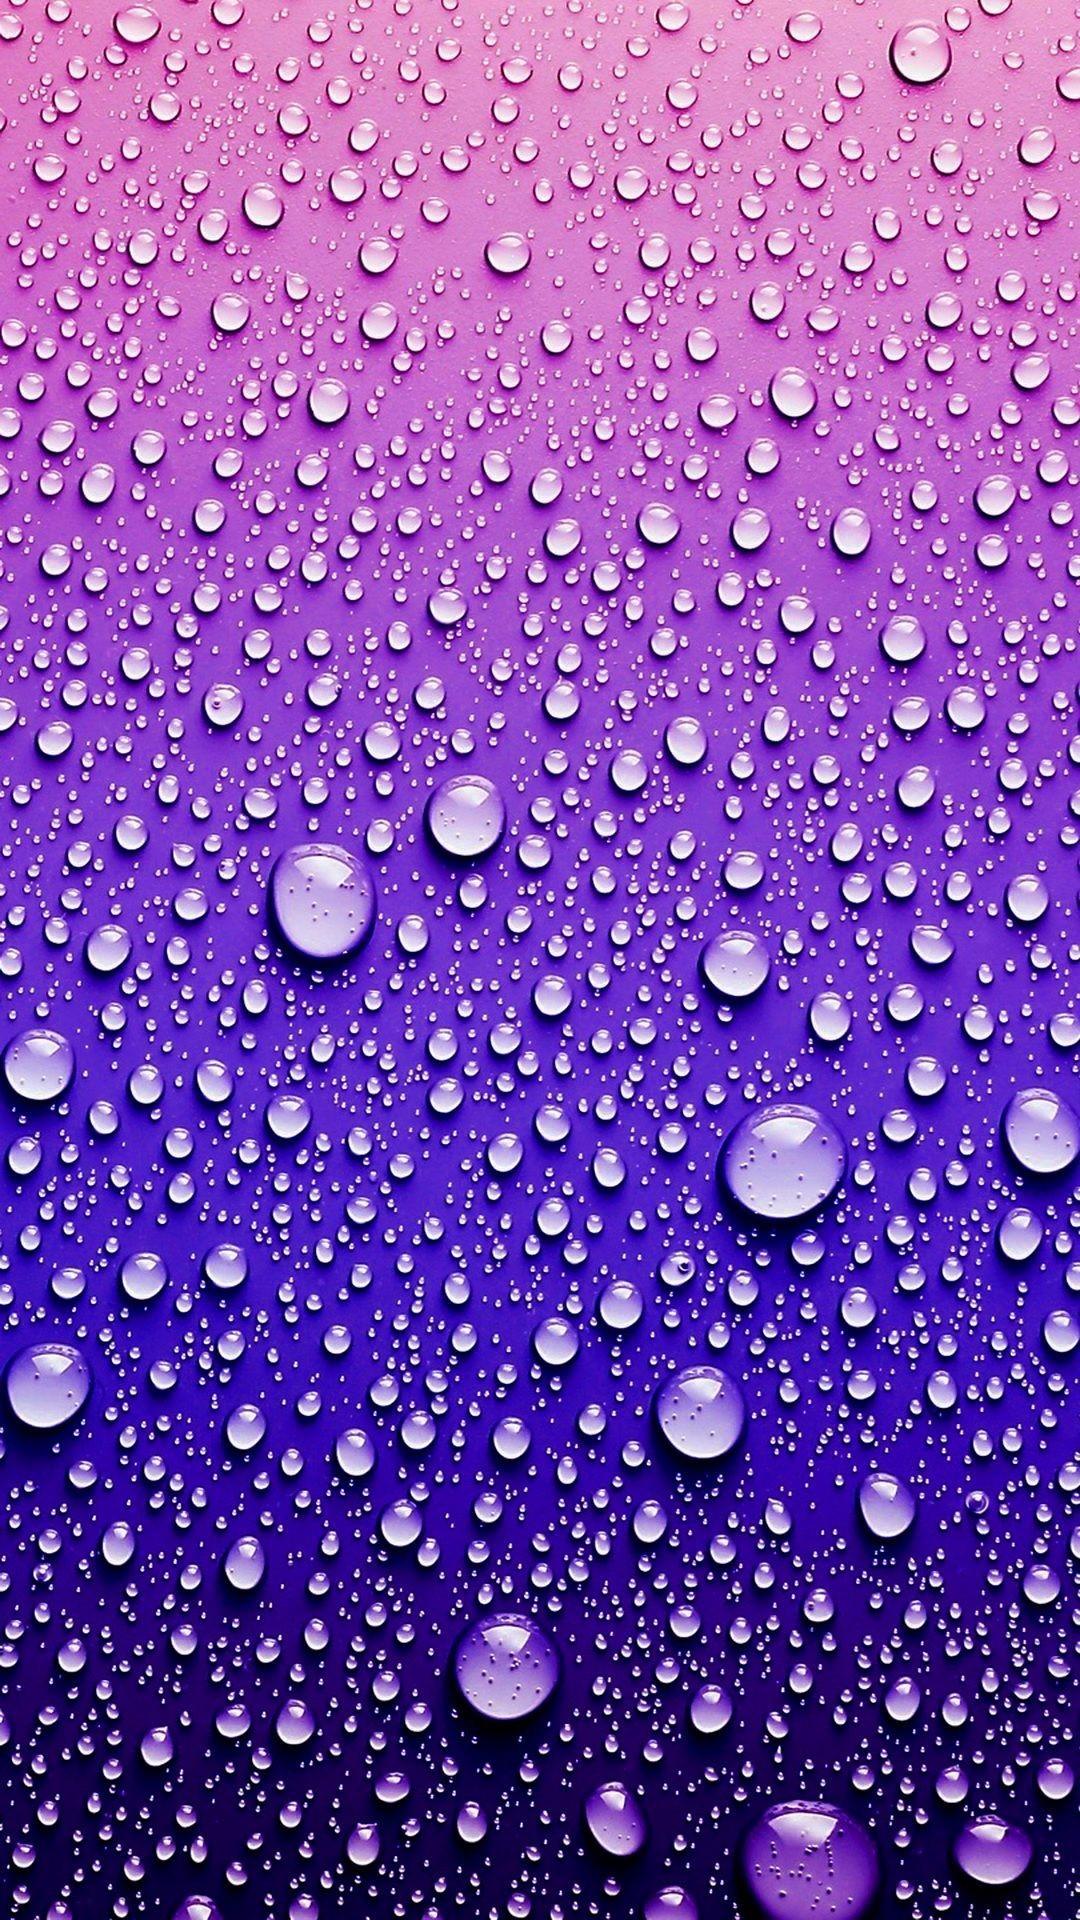 iPhone Water Drop Wallpapers Group 72